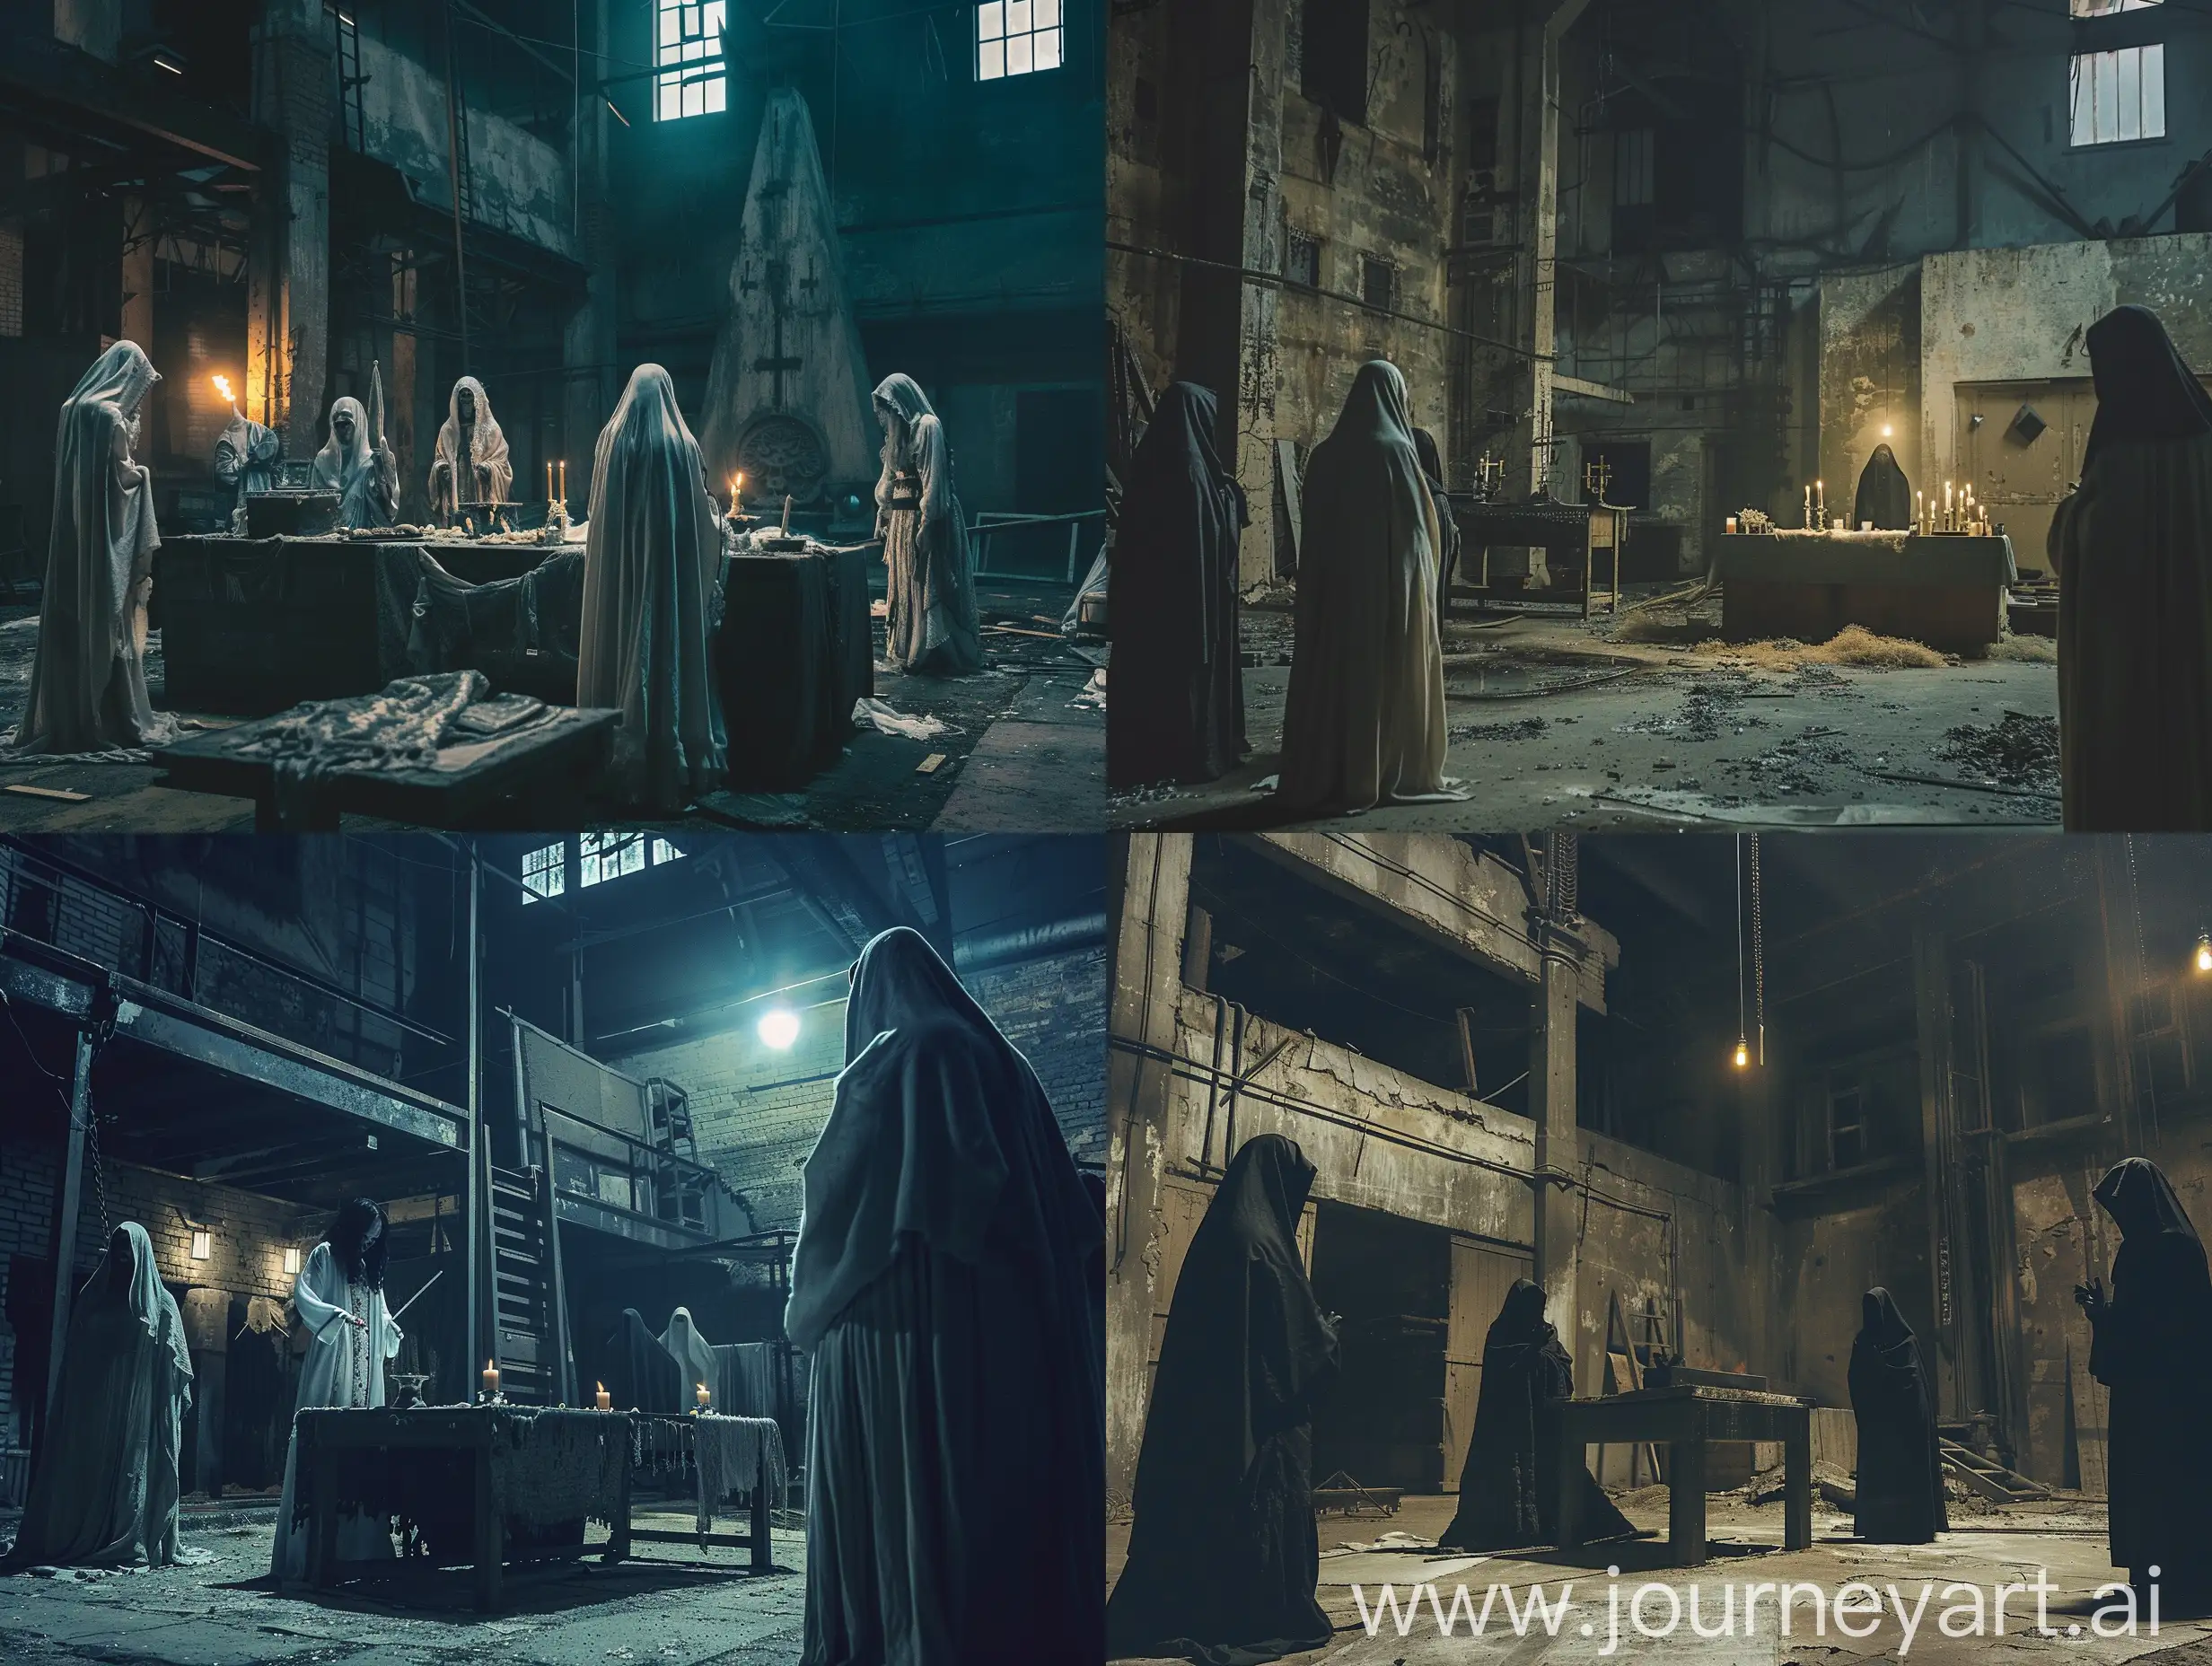 very dark room at night, evil priestess at the altar, cultists wearing hooded robes perform a sinister ritual inside a dilapidated factory. dvd screen grab, production still, horror film